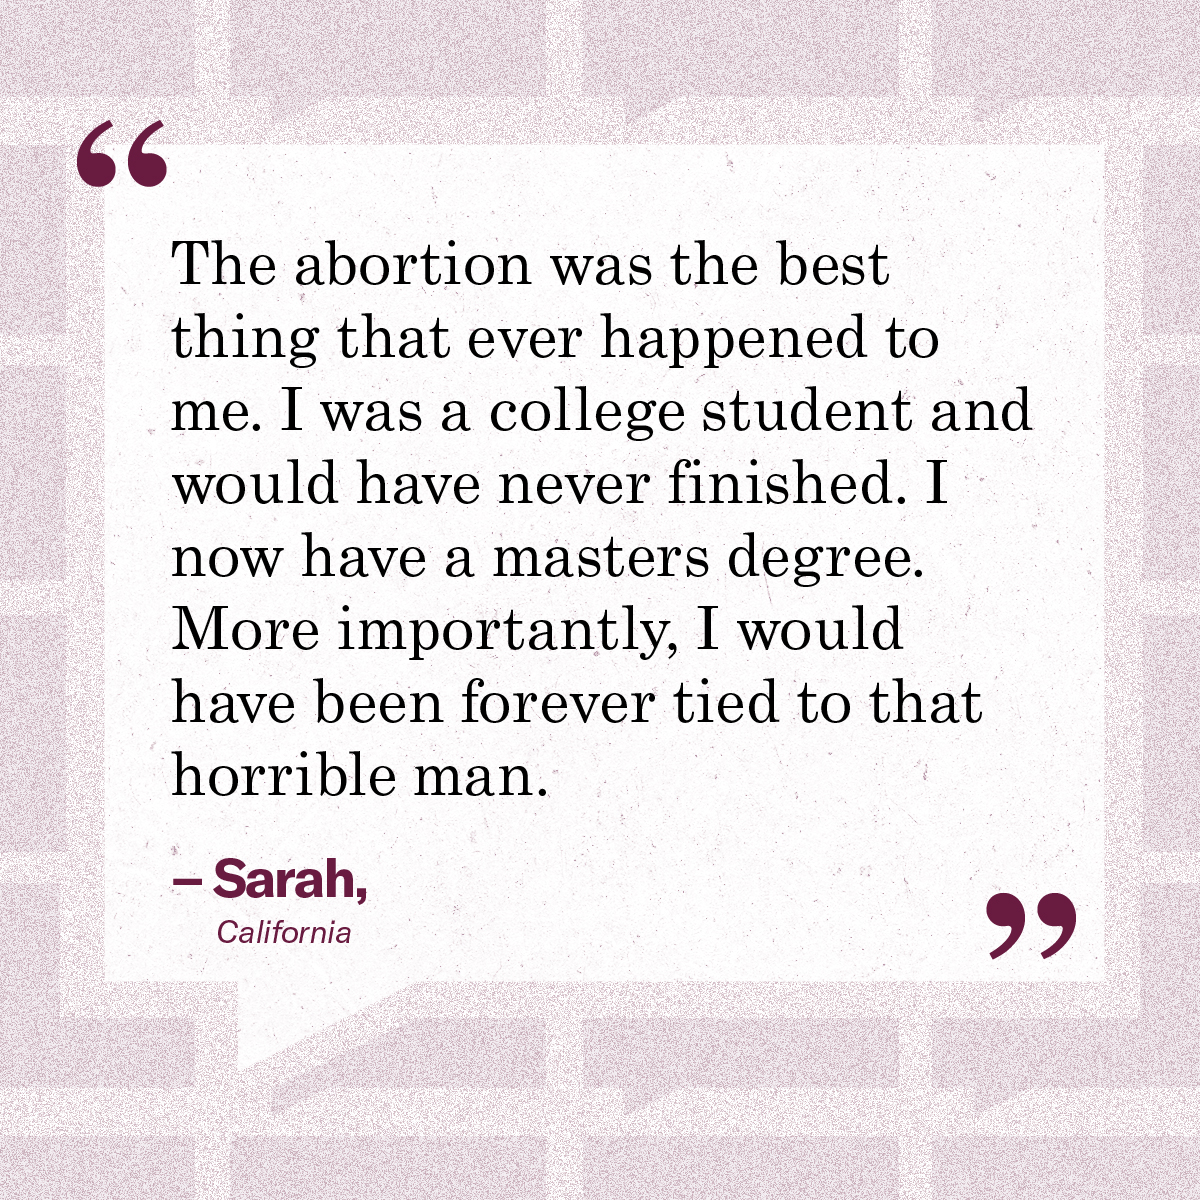 “The abortion was the best thing that ever happened to me. I was a college student and would have never finished. I now have a masters degree. More importantly, I would have been forever tied to that horrible man.” – Sarah, California